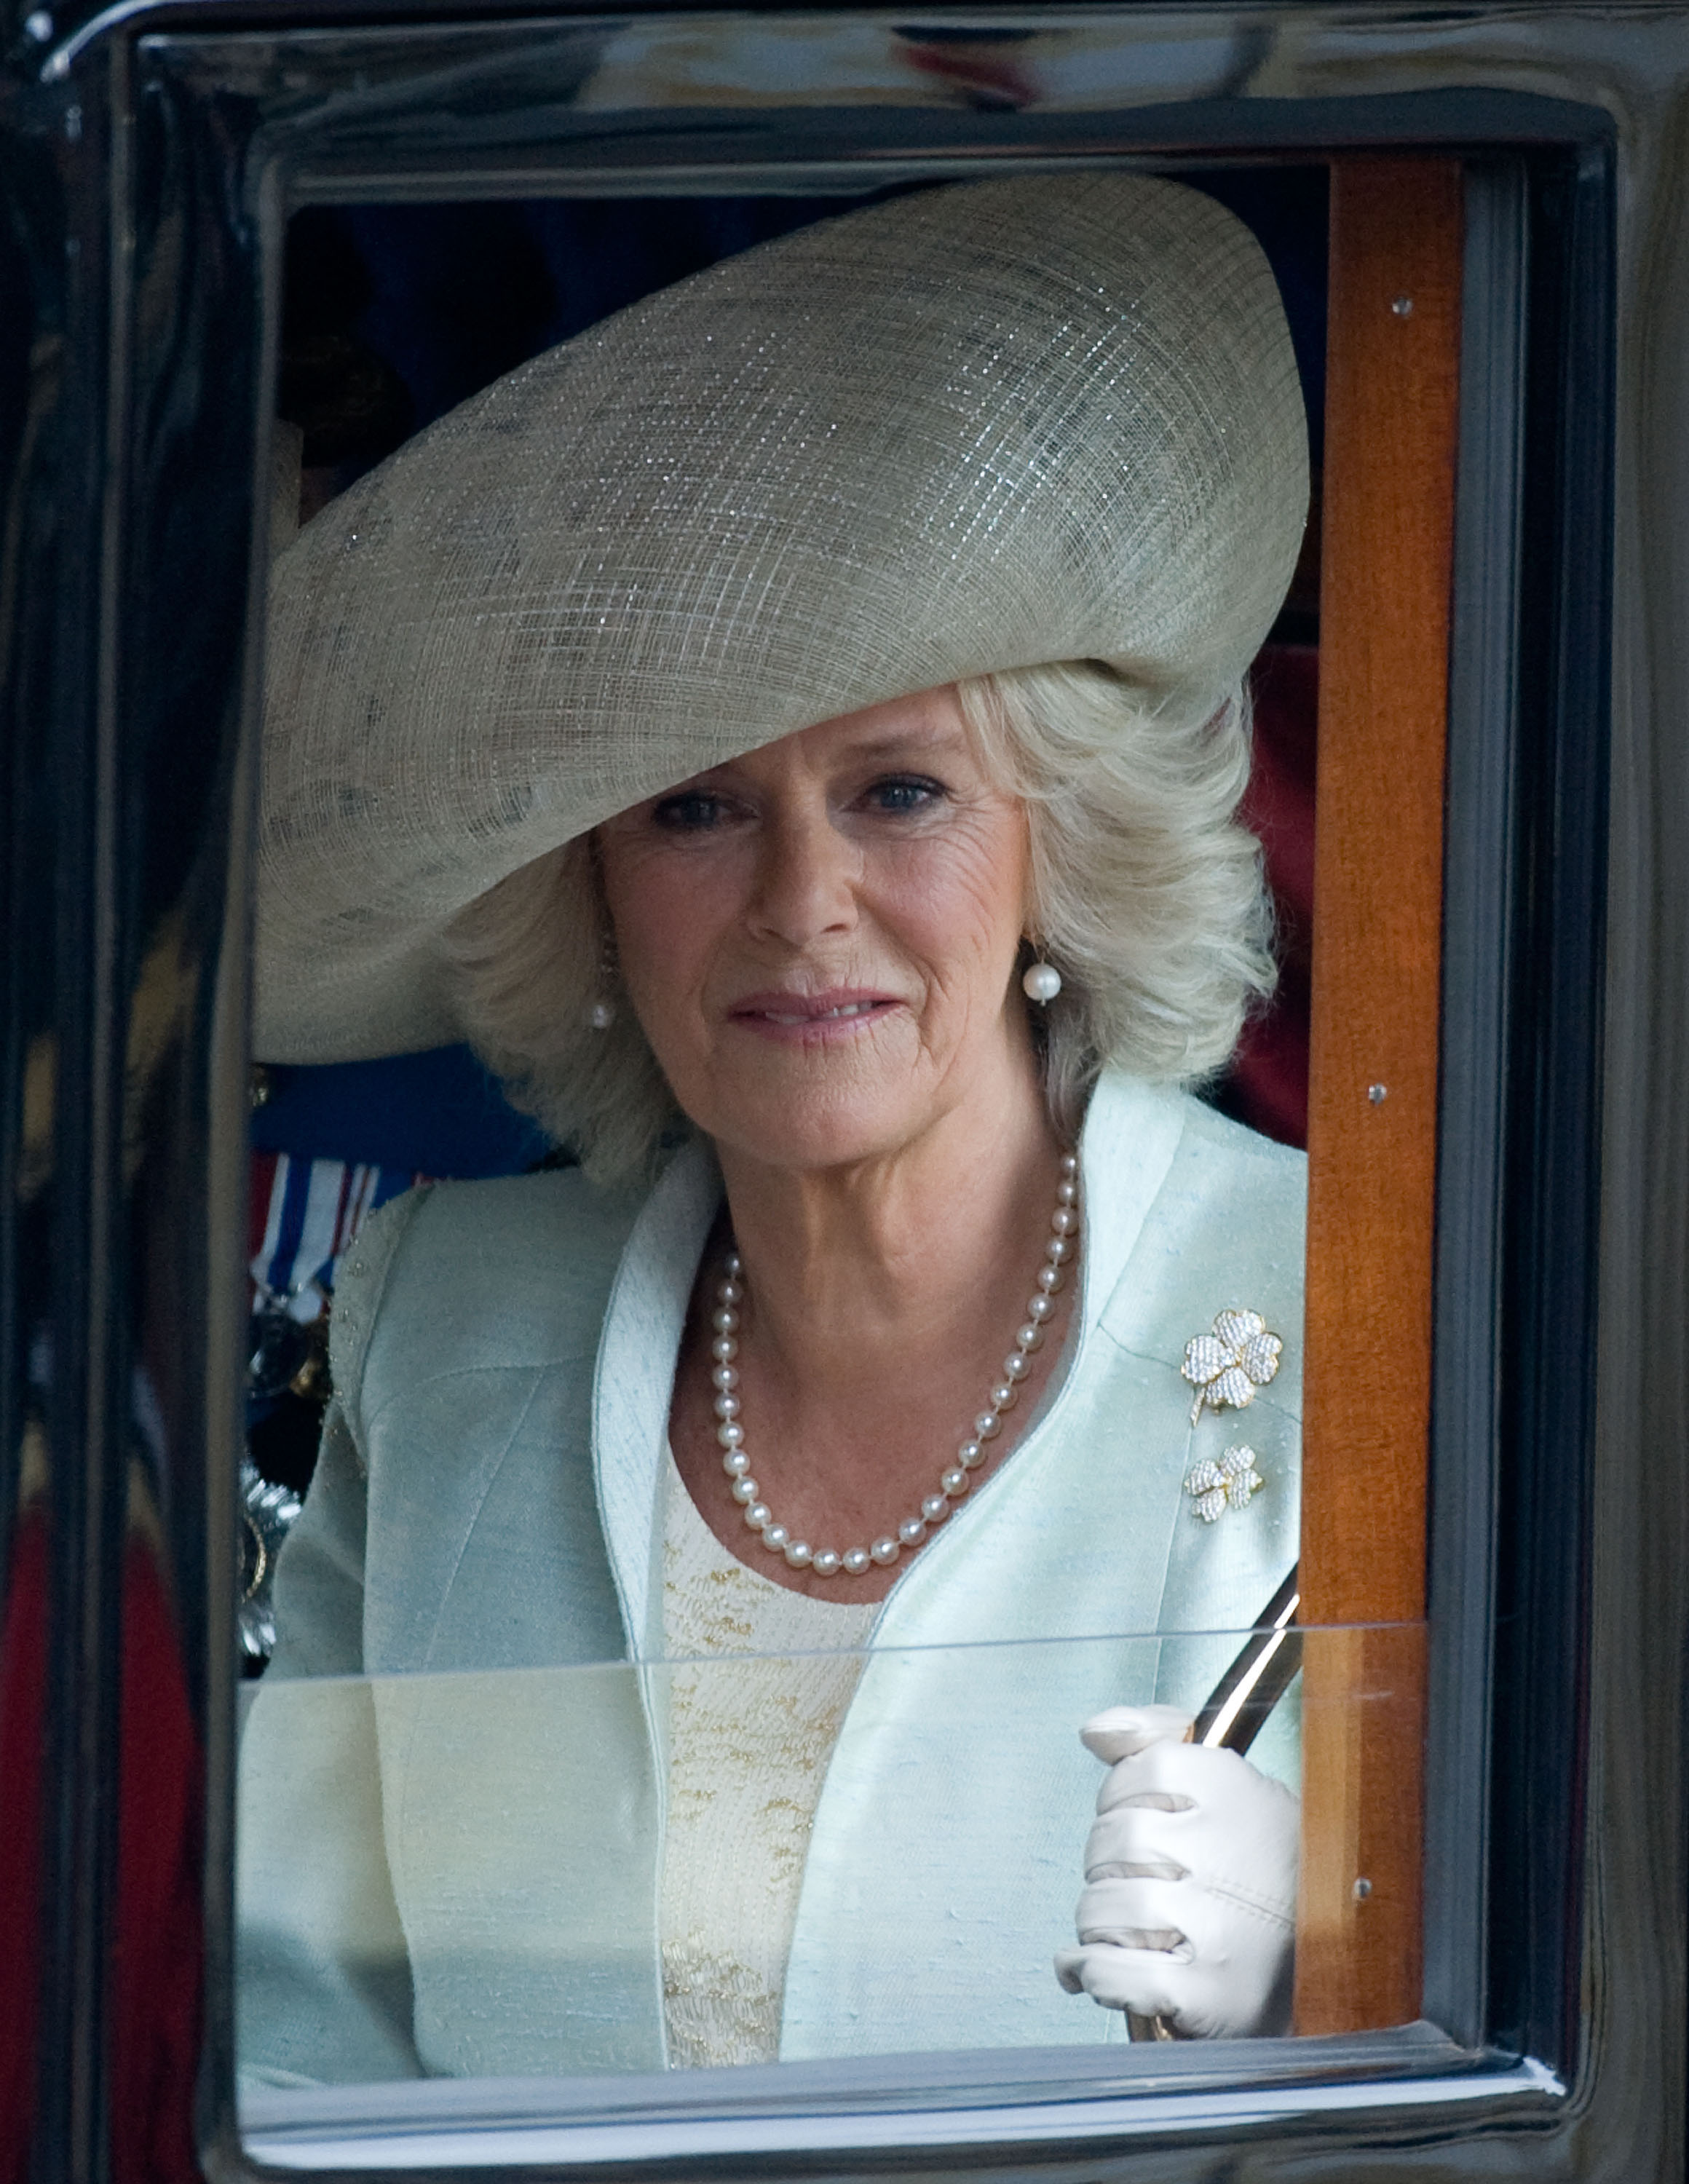 Camilla, now Queen Consort at Westminster Abbey on April 29, 2011 in London, England. | Source: Getty Images